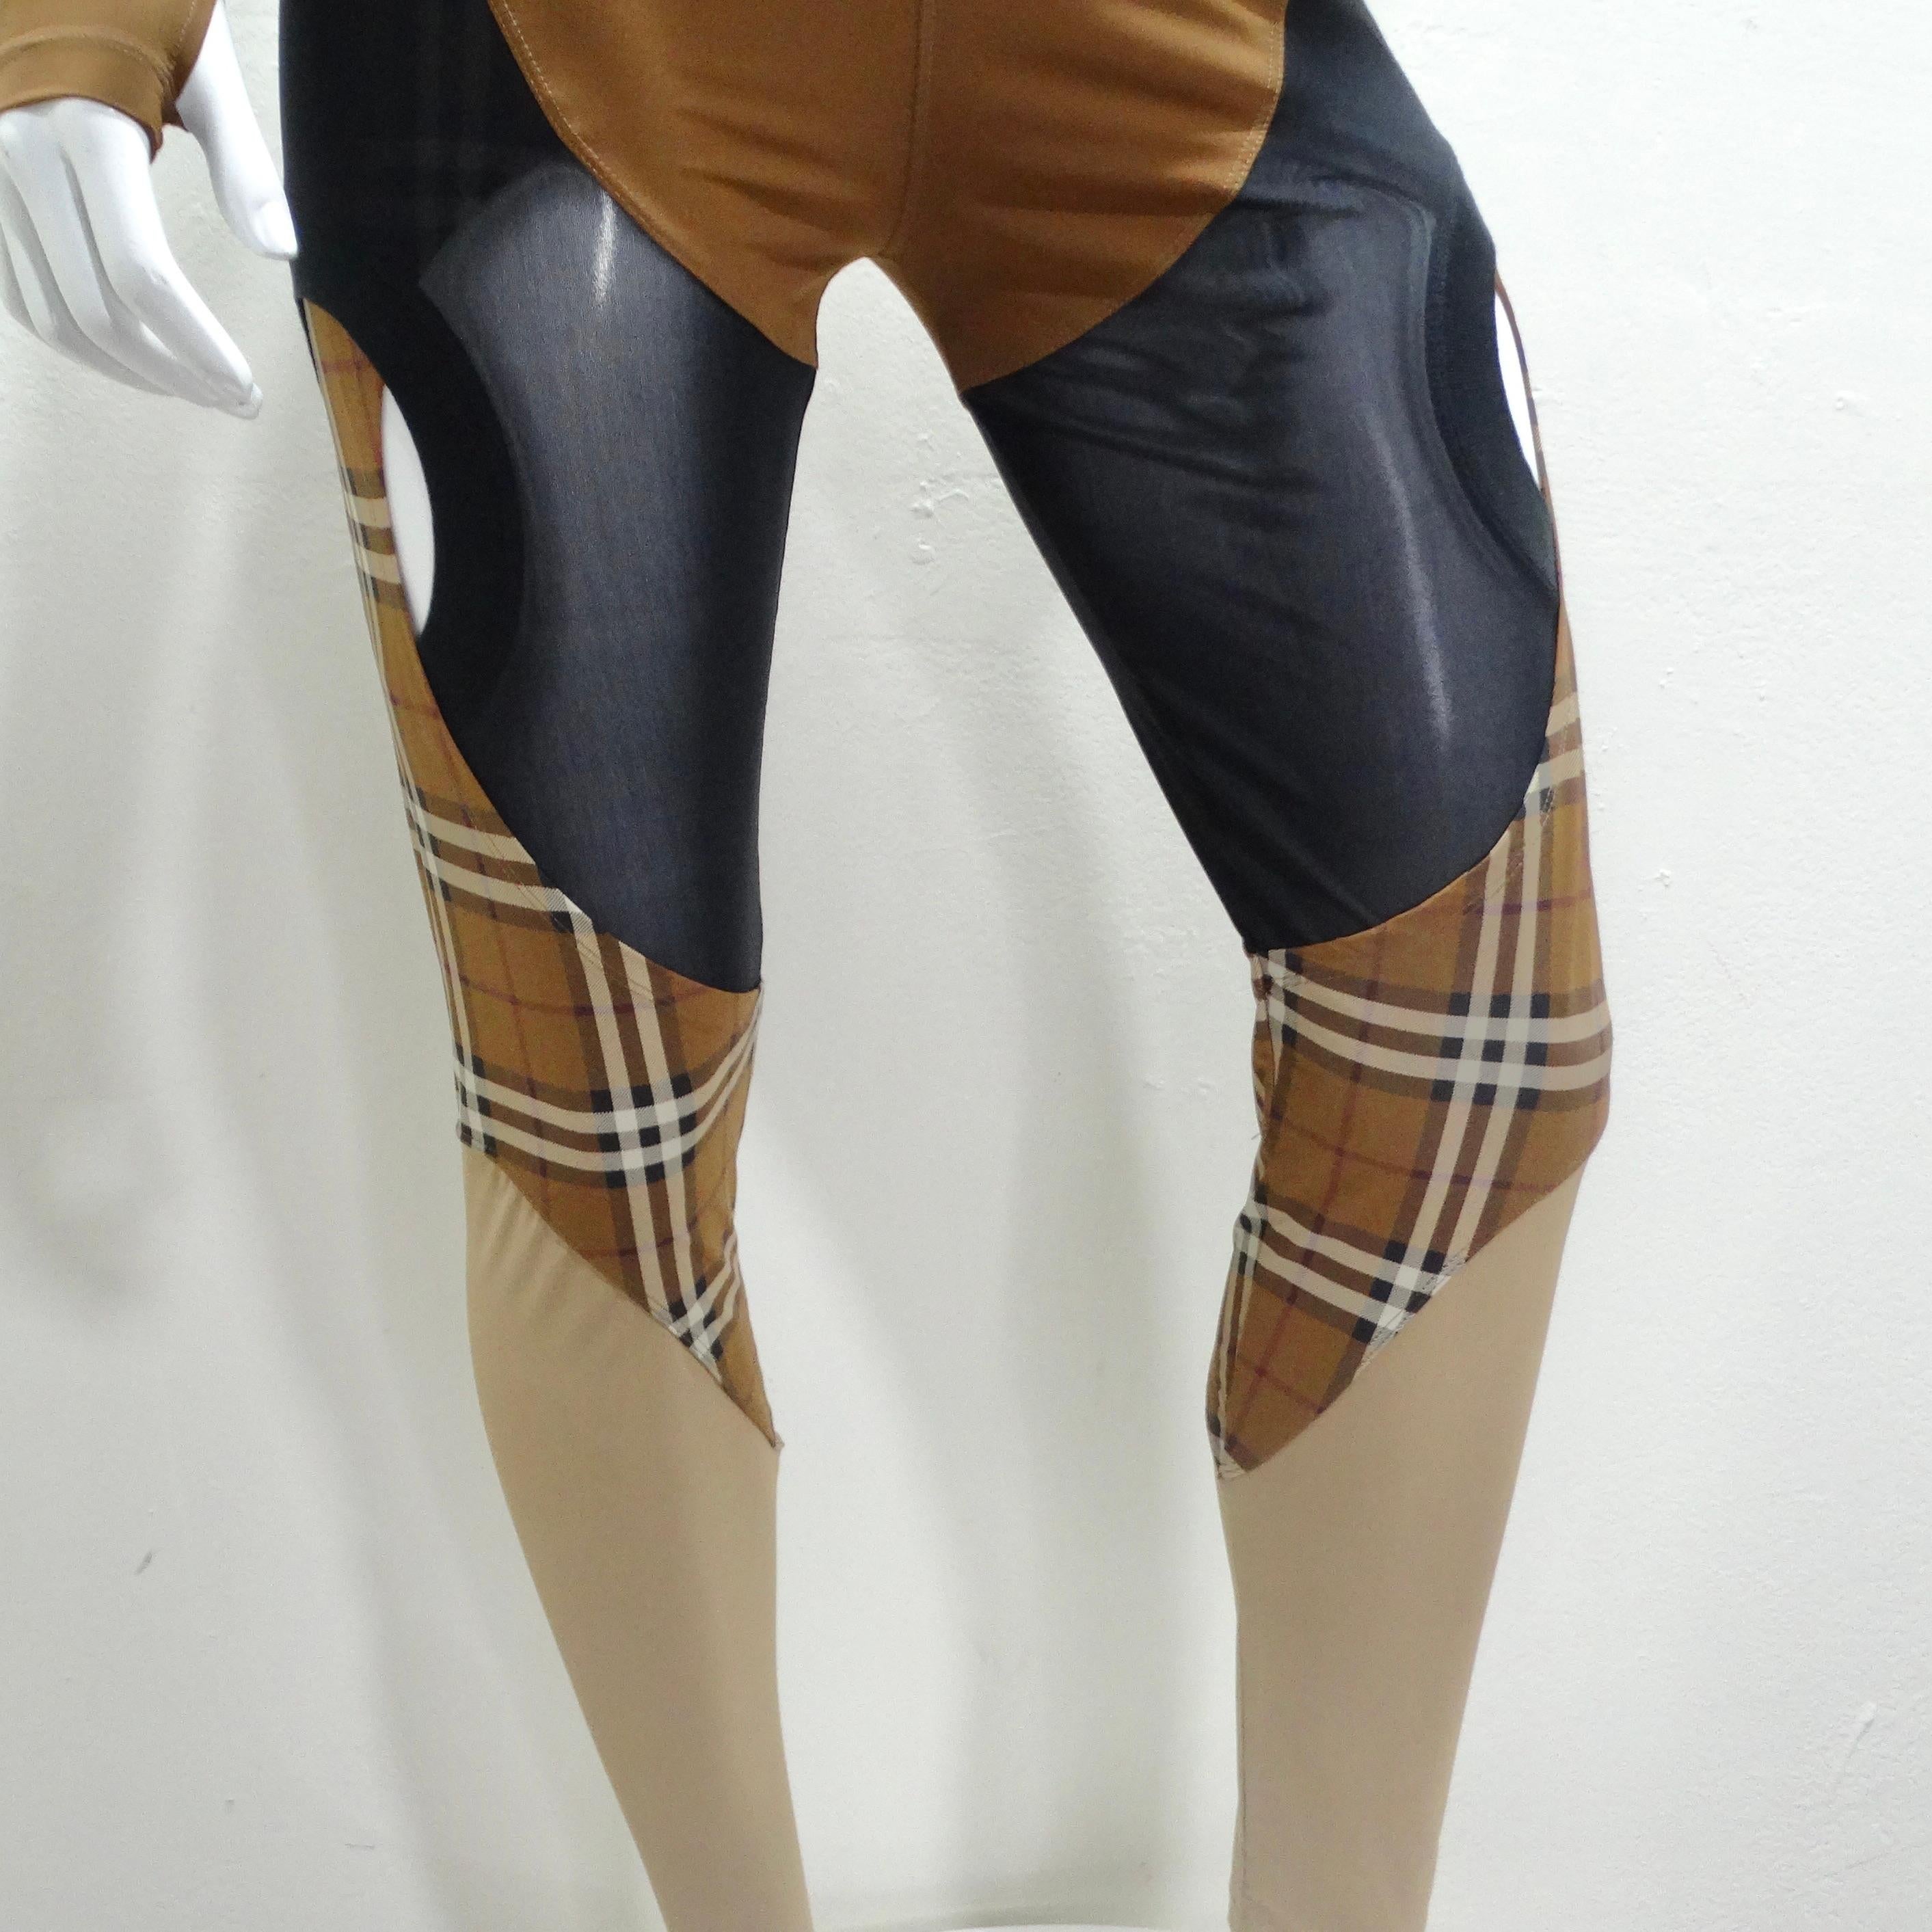 Burberry Sporty Panel Brown Leggings In Excellent Condition For Sale In Scottsdale, AZ